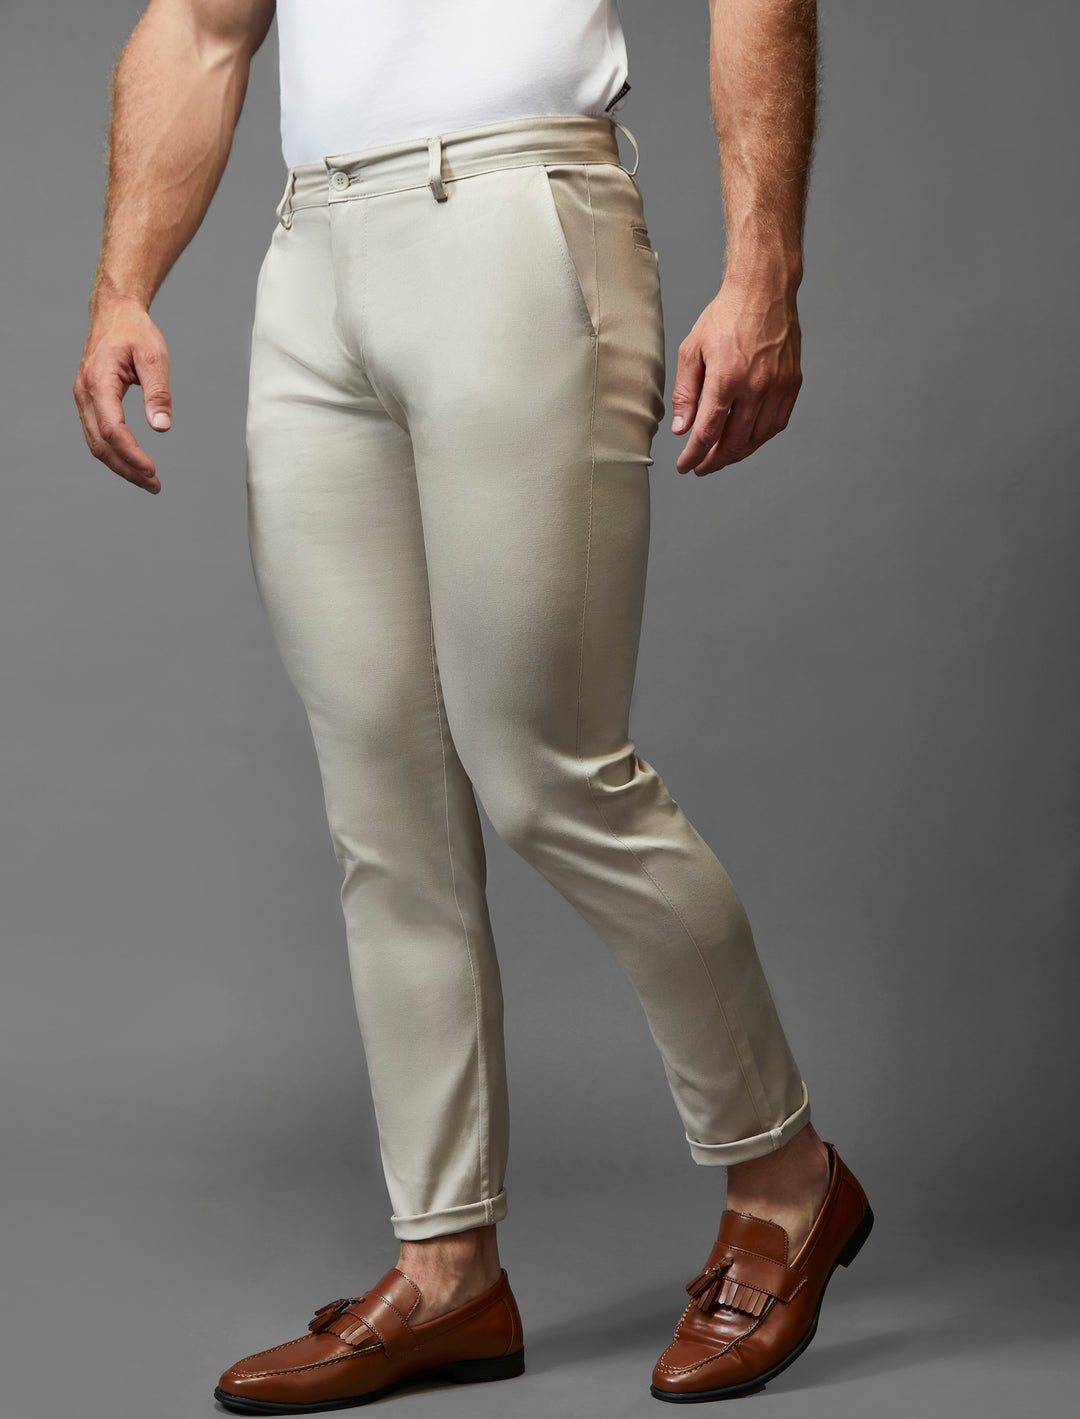 Chino & Khaki Pants Fit Guide - Men's Clothing Fit Guide 